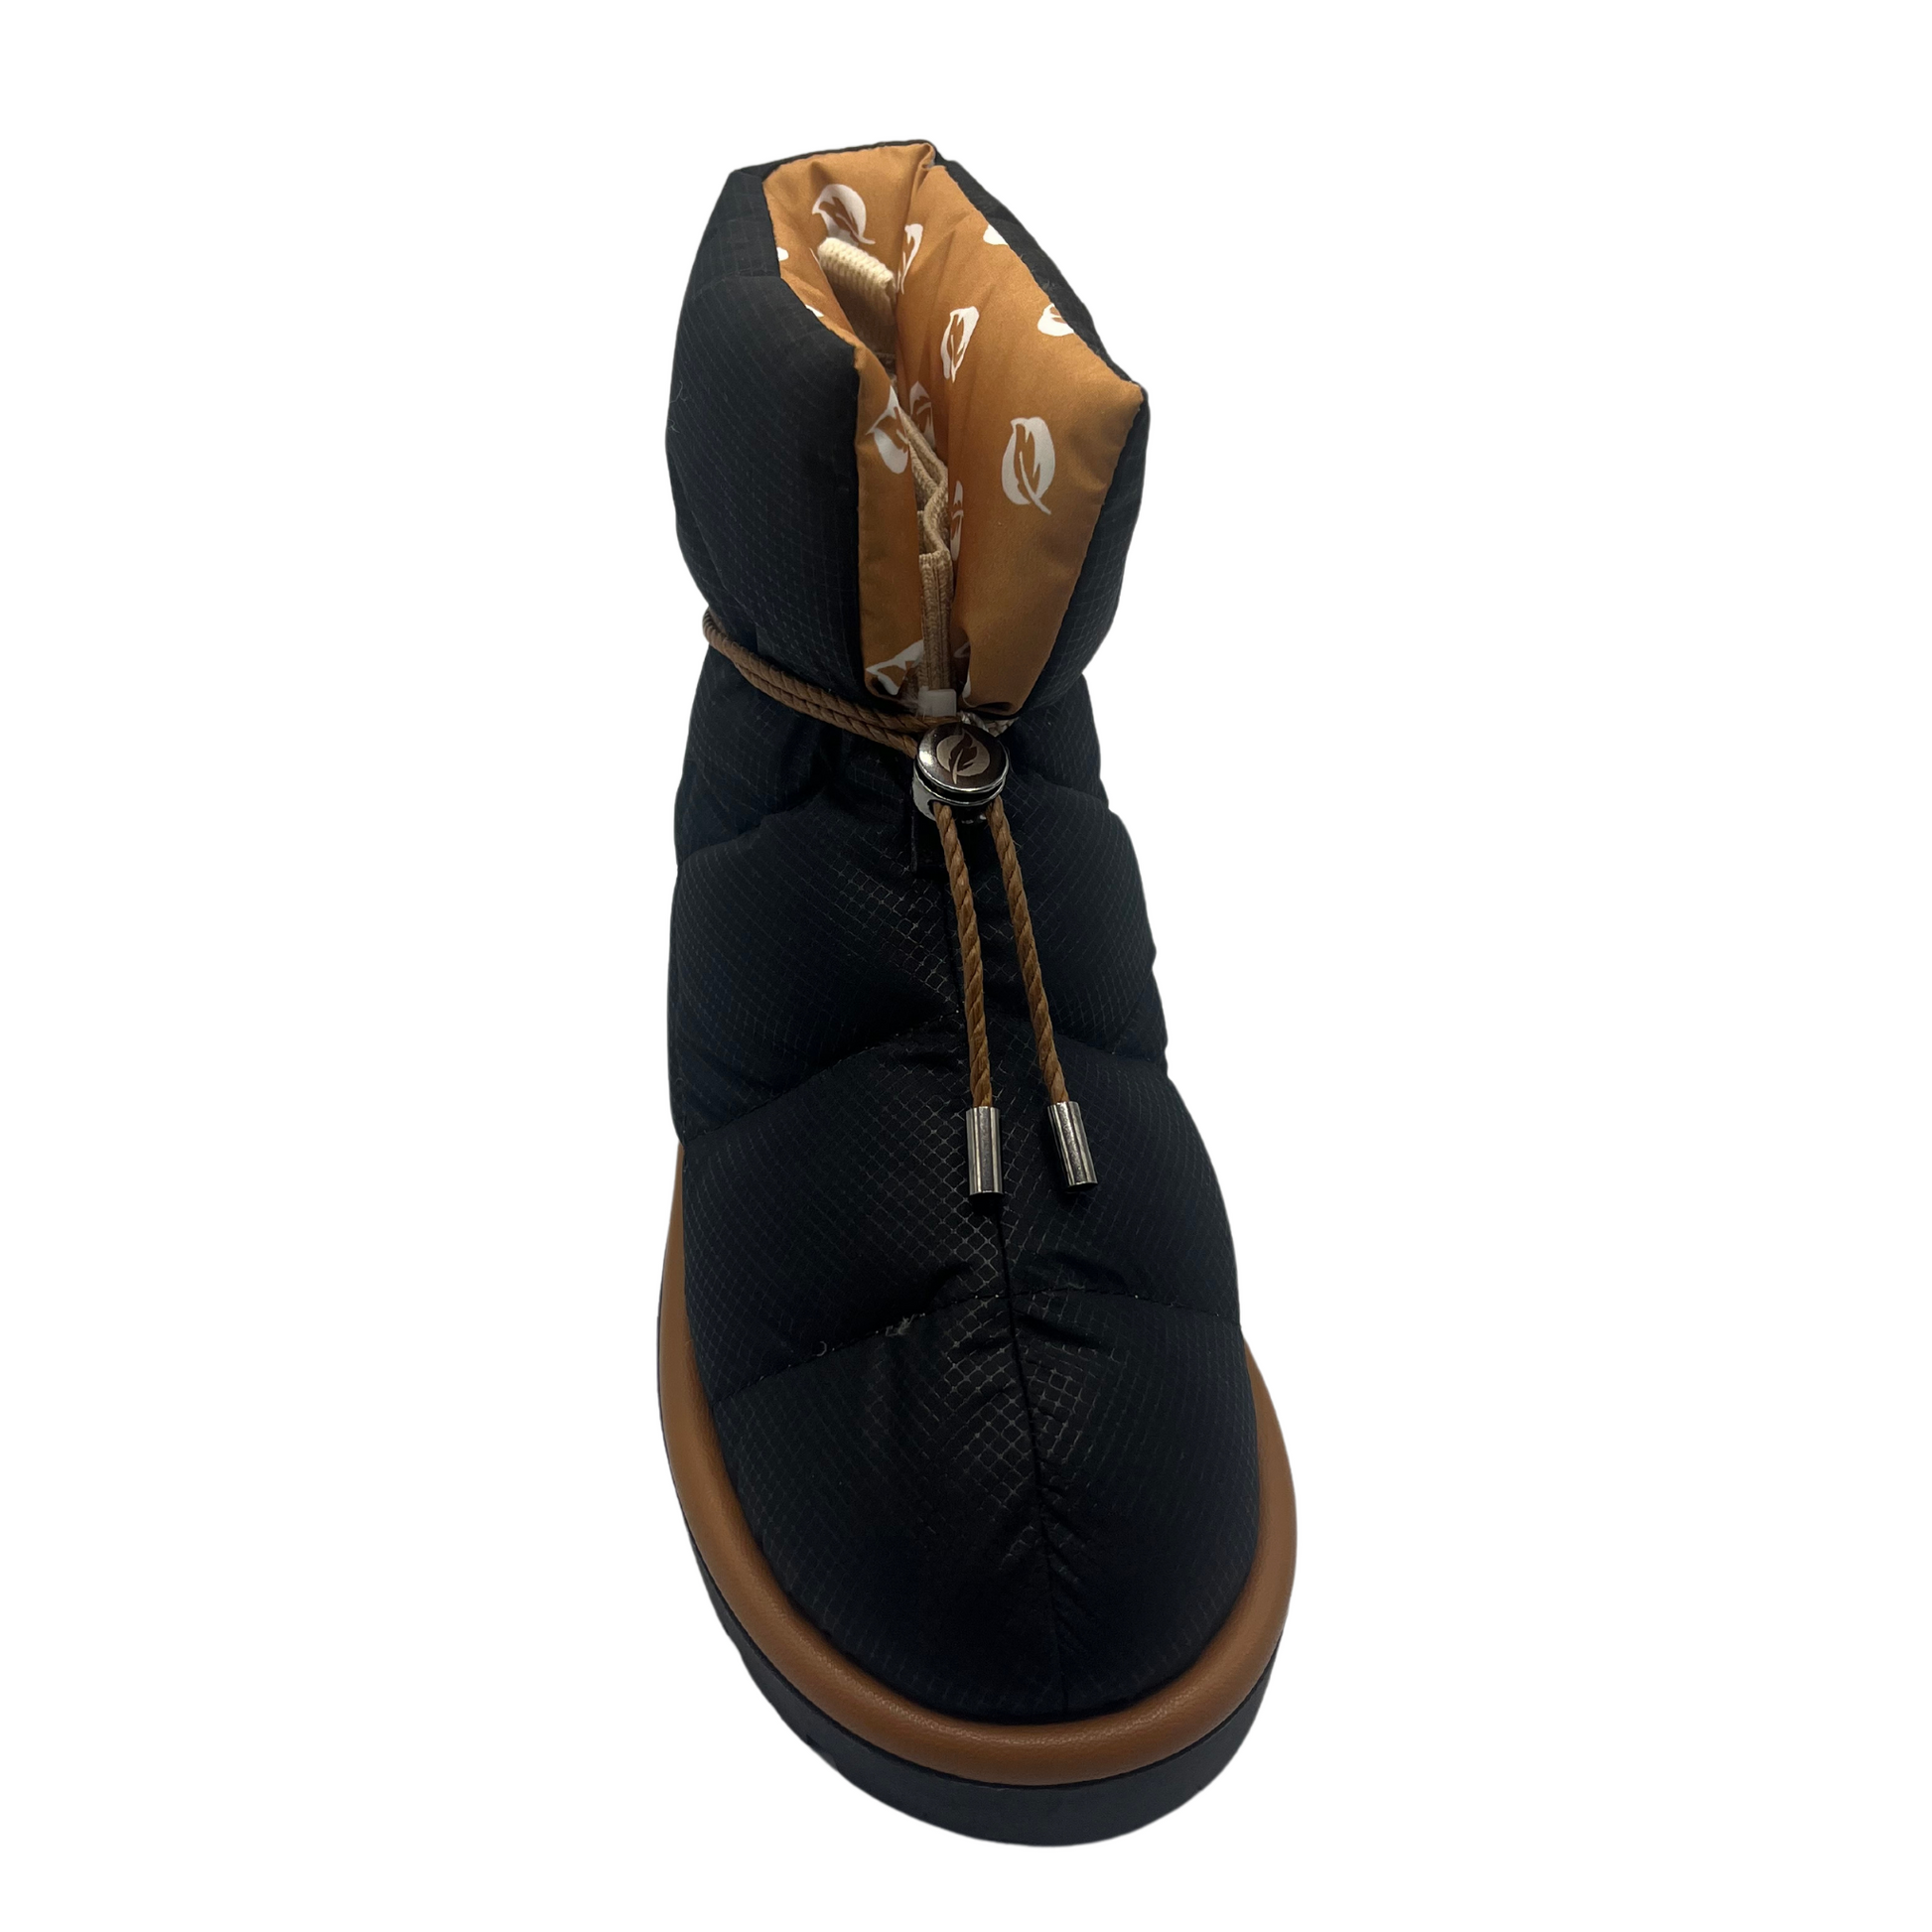 Top view of black puffer short boot with rounded toe